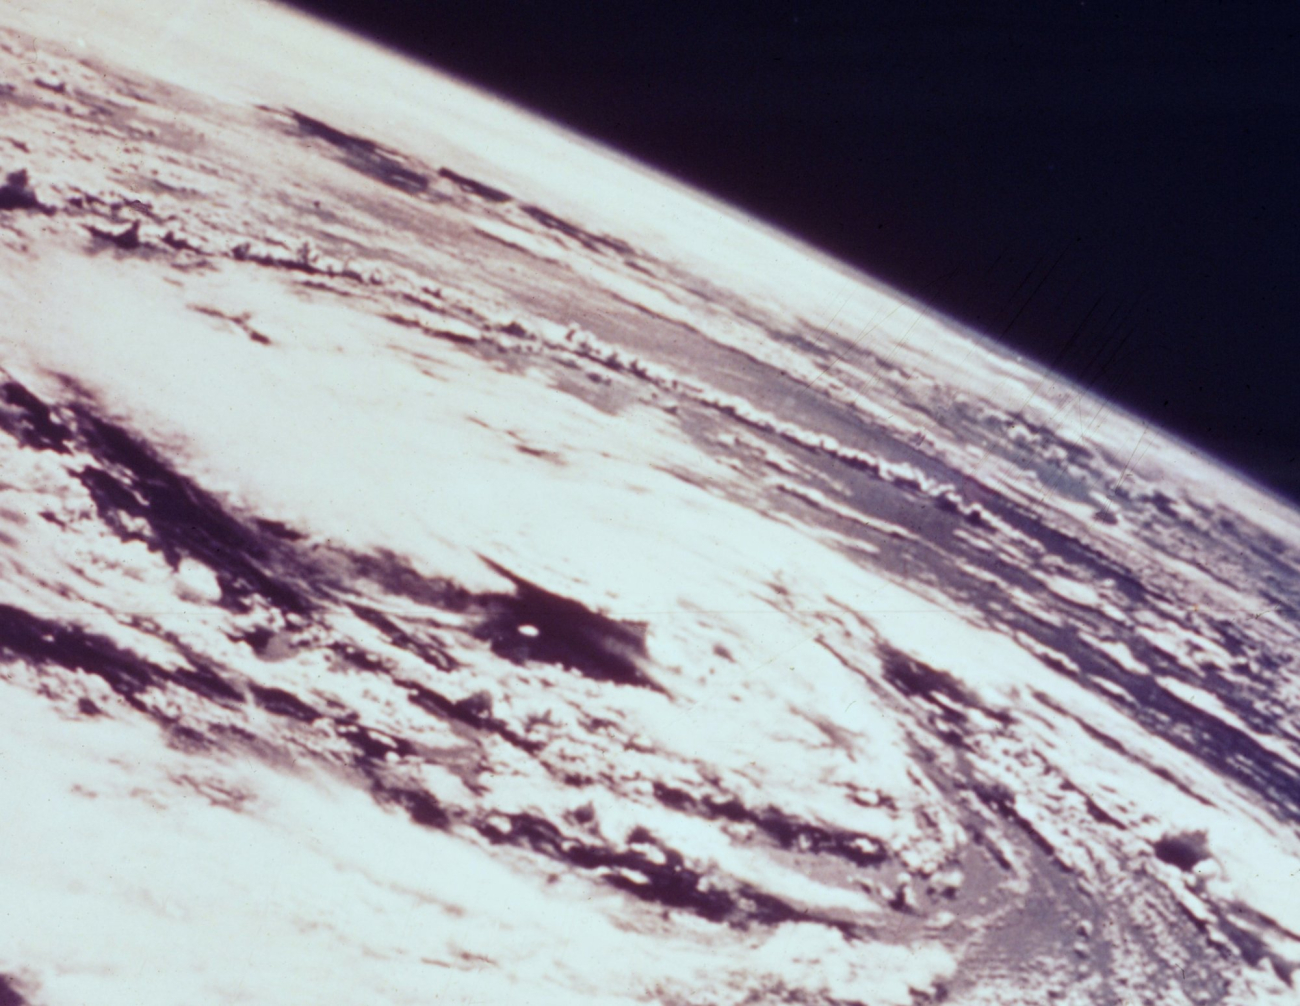 Hurricane Gladys as seen from Apollo 7 in its 99th revolution of the Earth